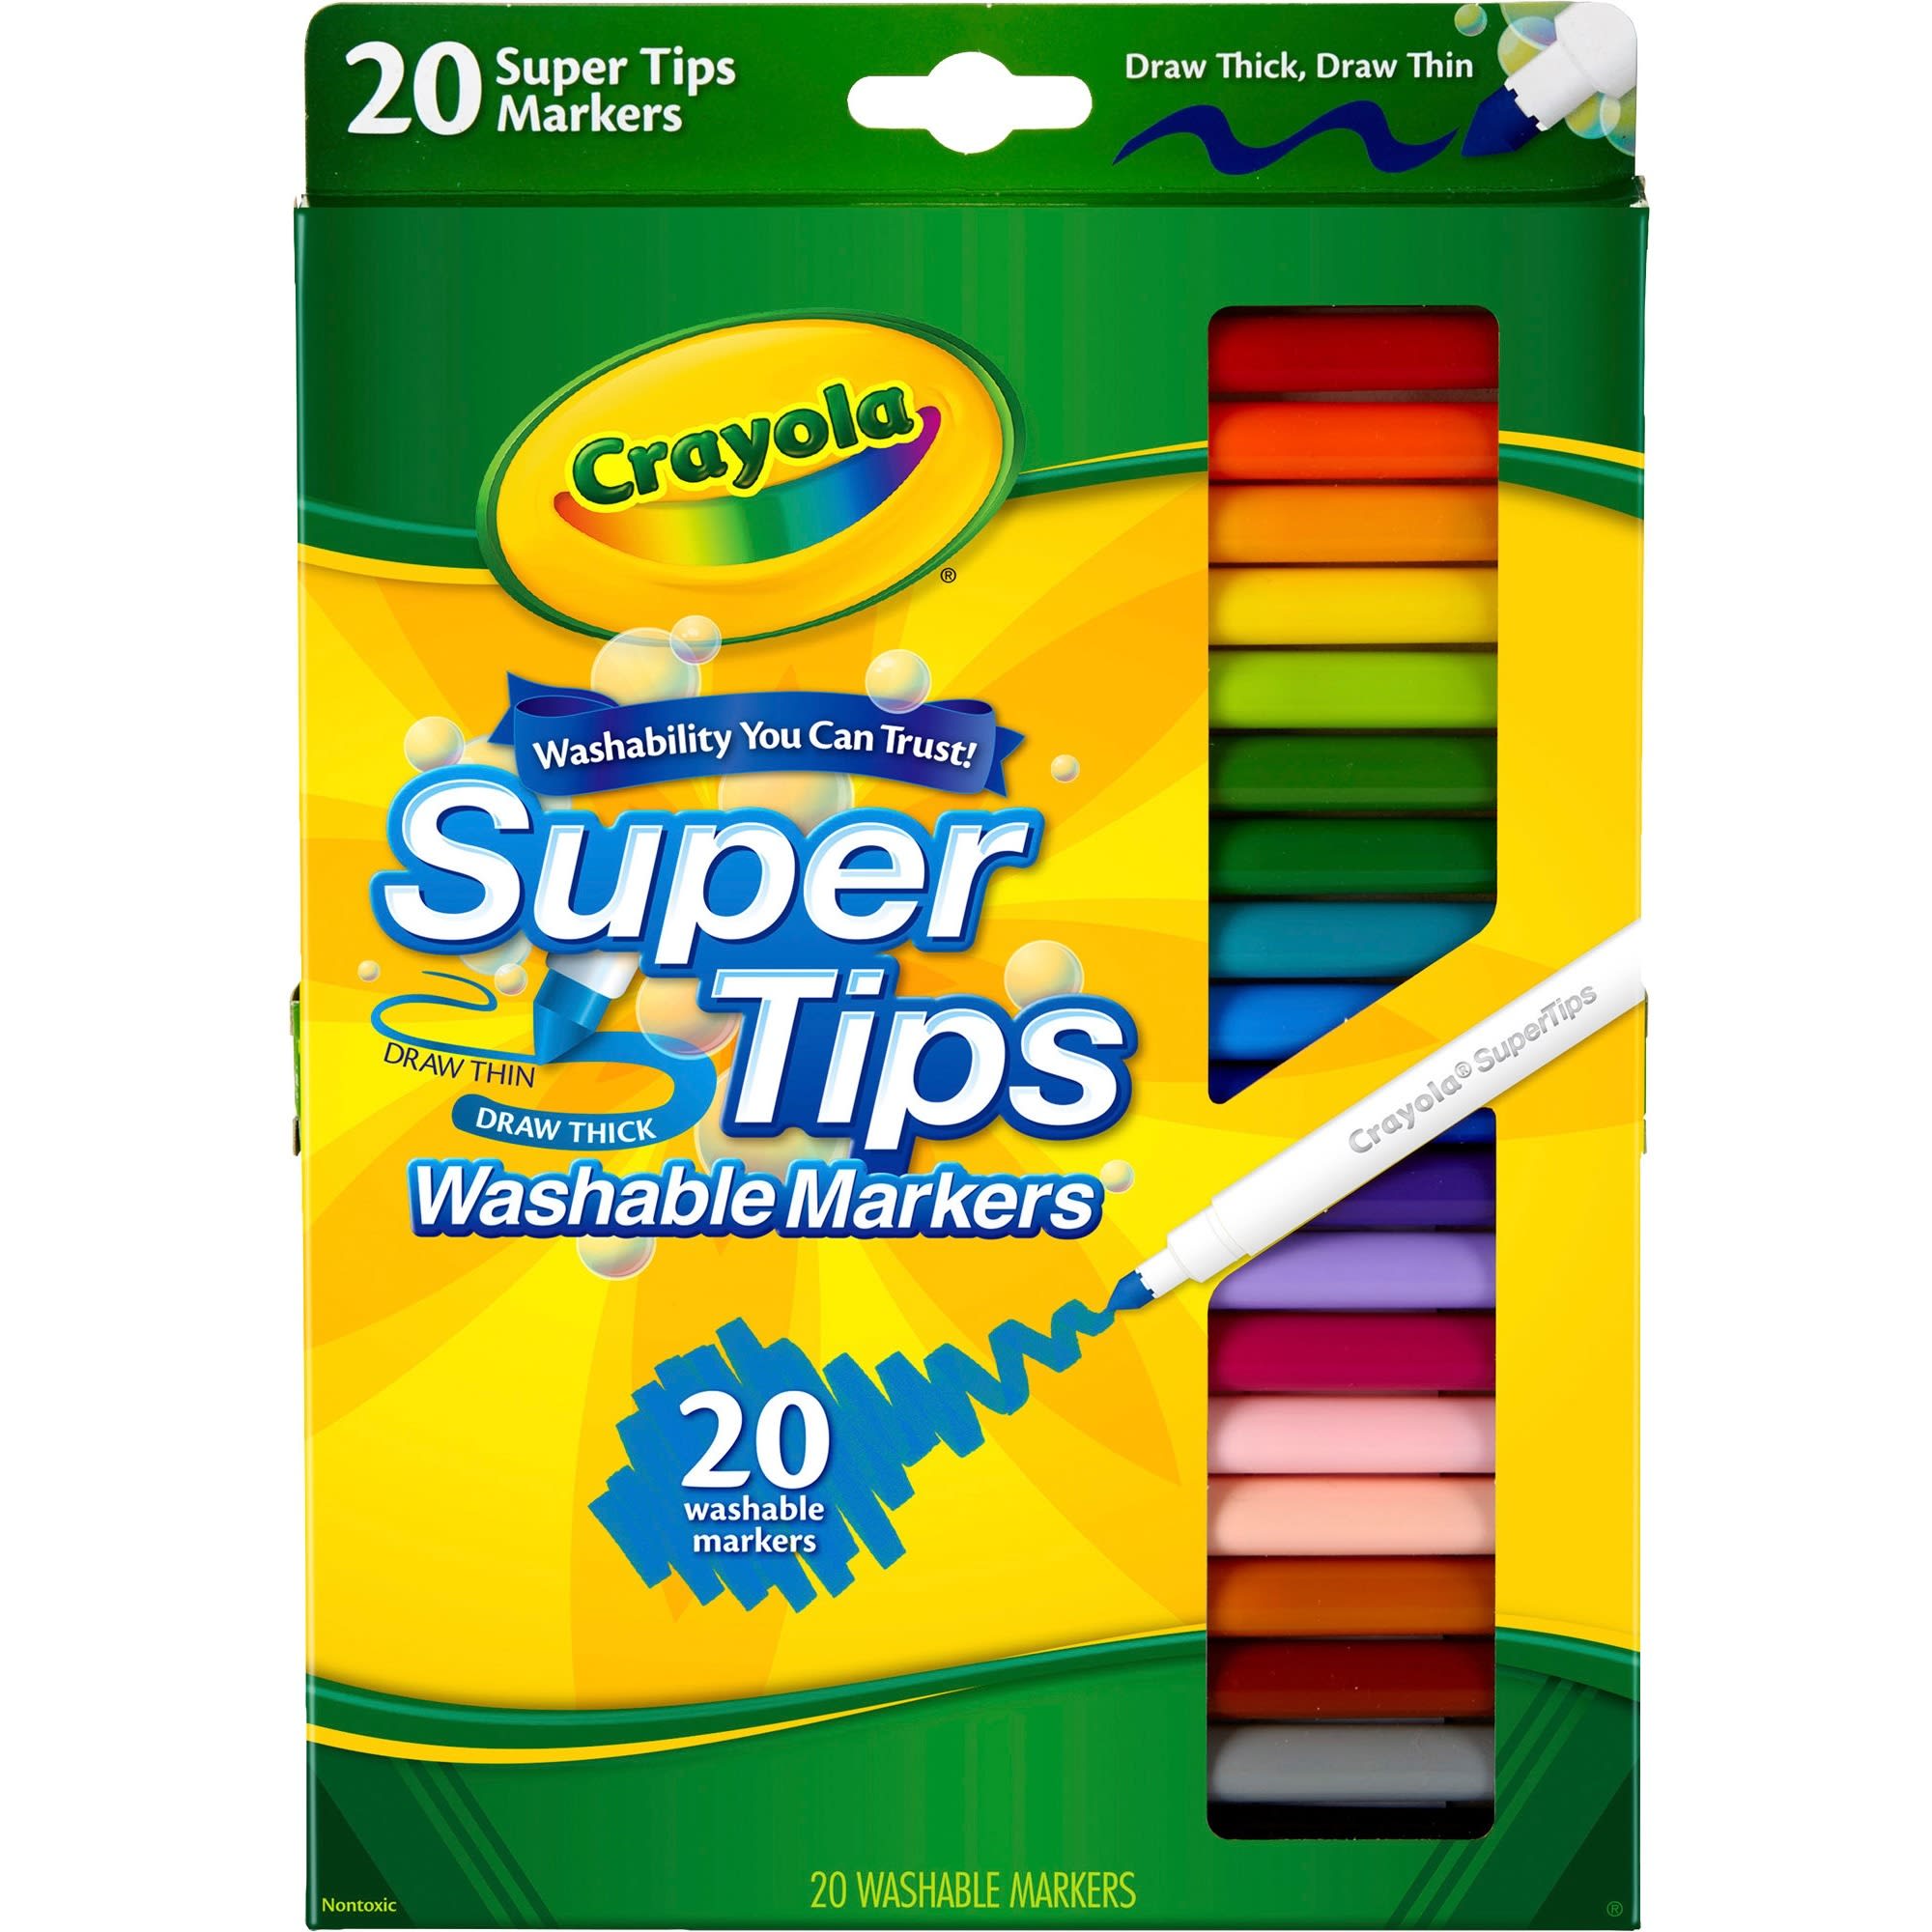 https://media.officedepot.com/image/upload/v1666030709/content/AEM%20Images%20%28WWW%2CODP%29/Office%20Supplies/Pens%2C%20Pencils%20and%20Markers/Markers%20and%20Highlighters/Washable%20Art%20Markers.jpg